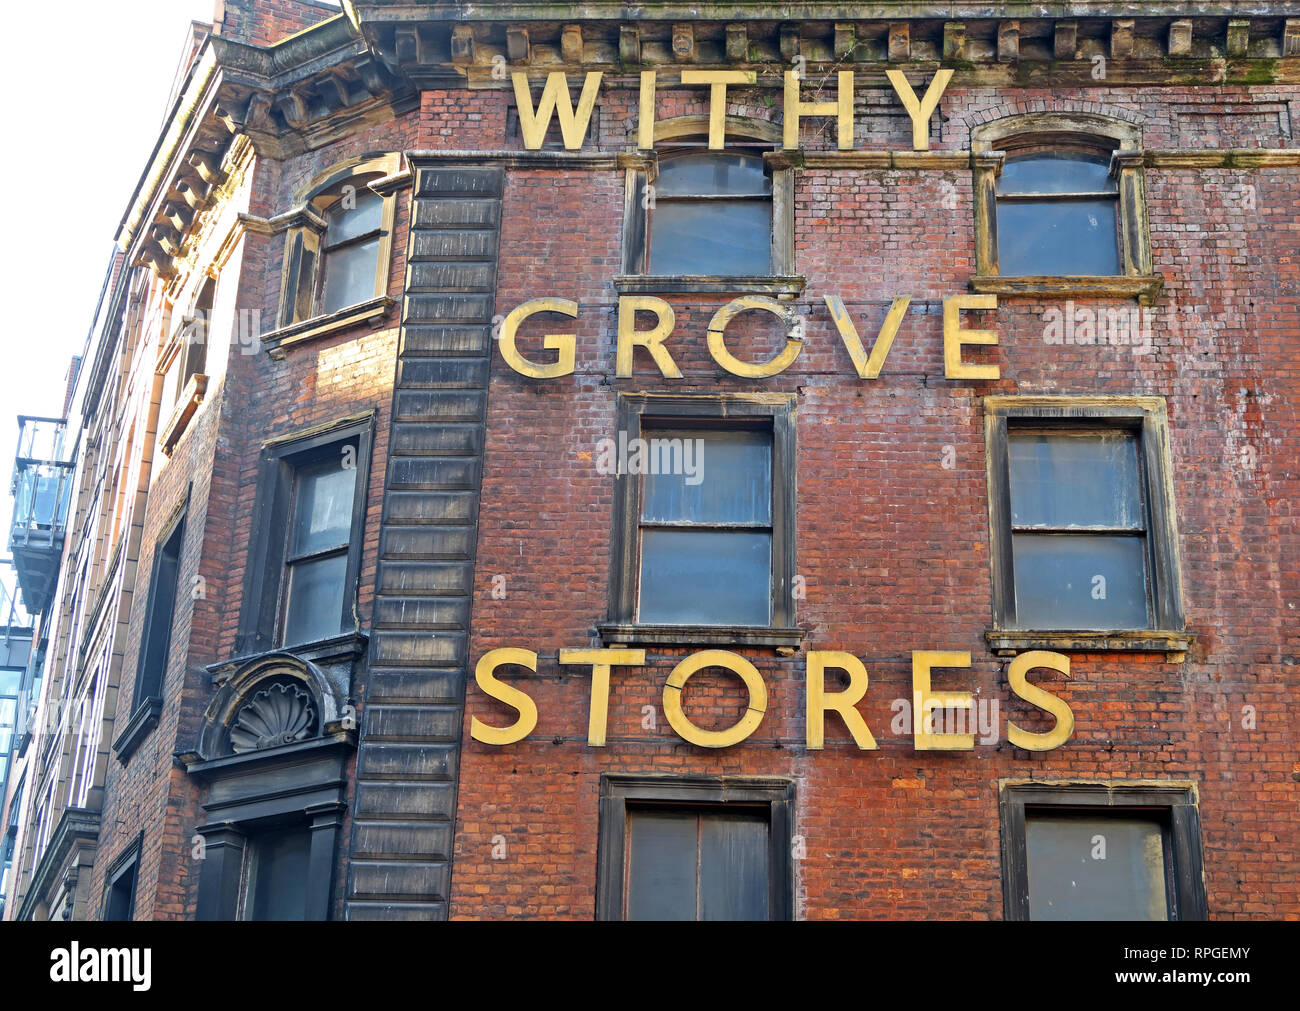 Withy Grove Stores, Office Equipment,Shude Hill, Manchester City Centre, Lancashire, North West England, UK, M4 2BJ Stock Photo